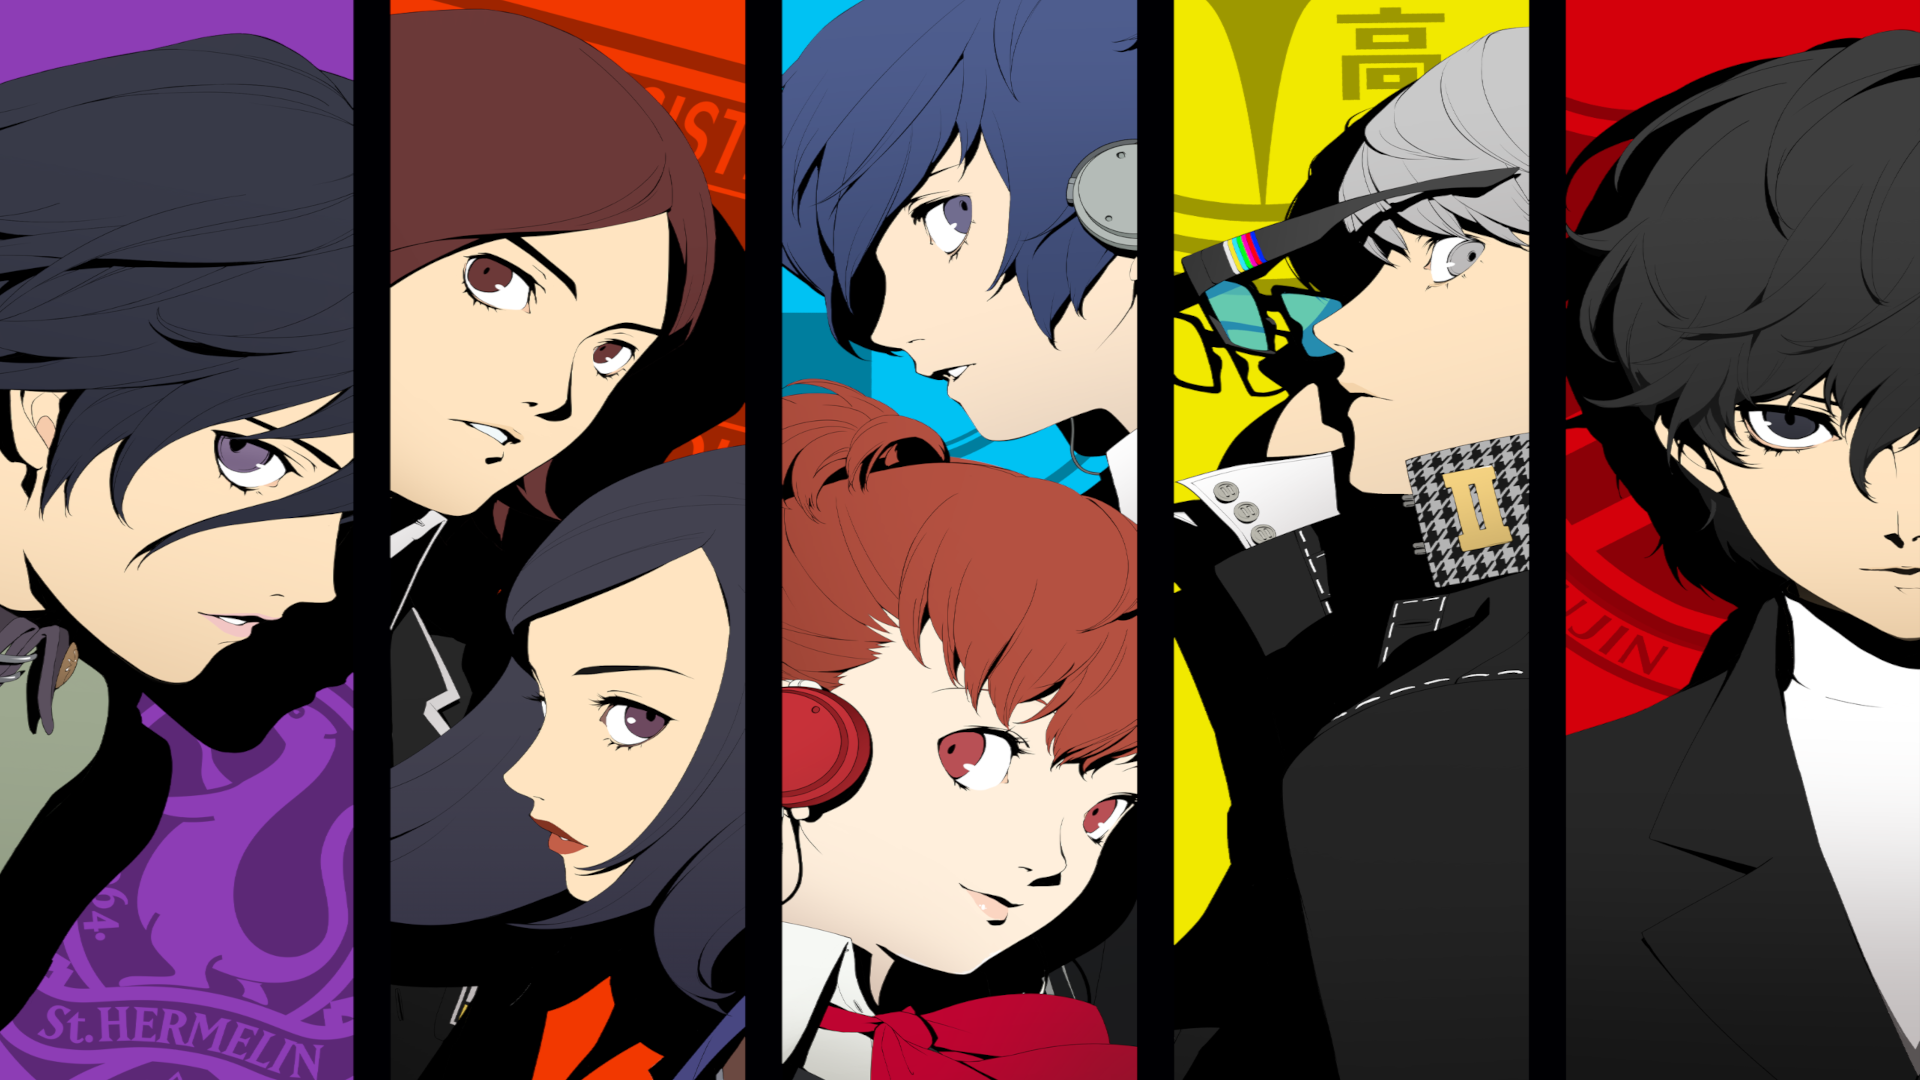 Atlus has announced its own event, where it will tell more about the already announced projects